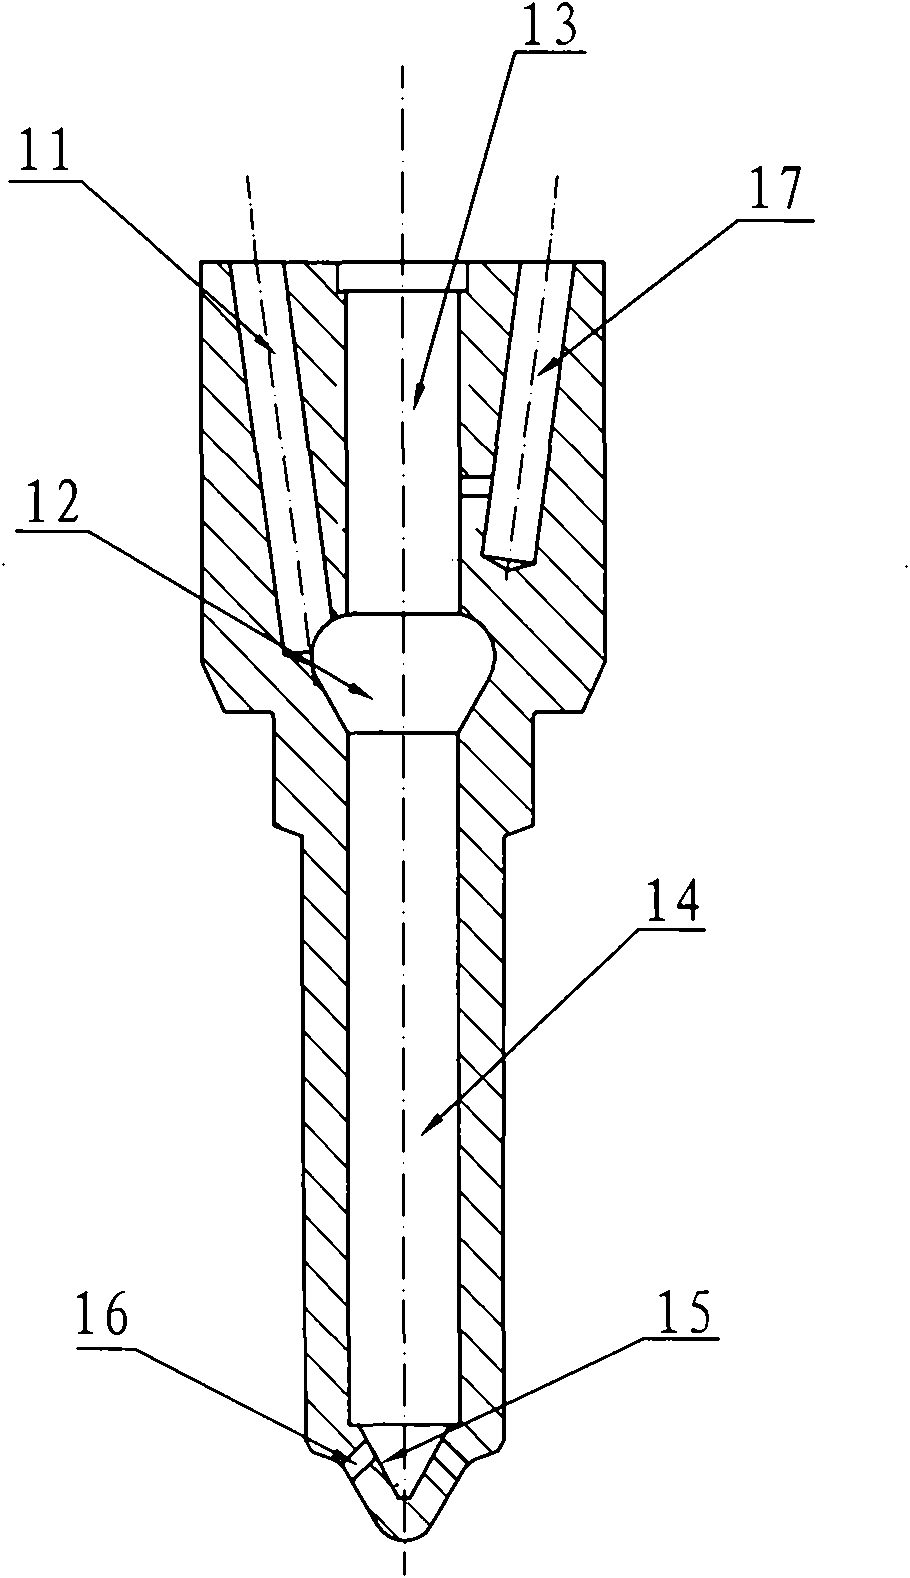 Diesel injector coupler applied to multiple fuels